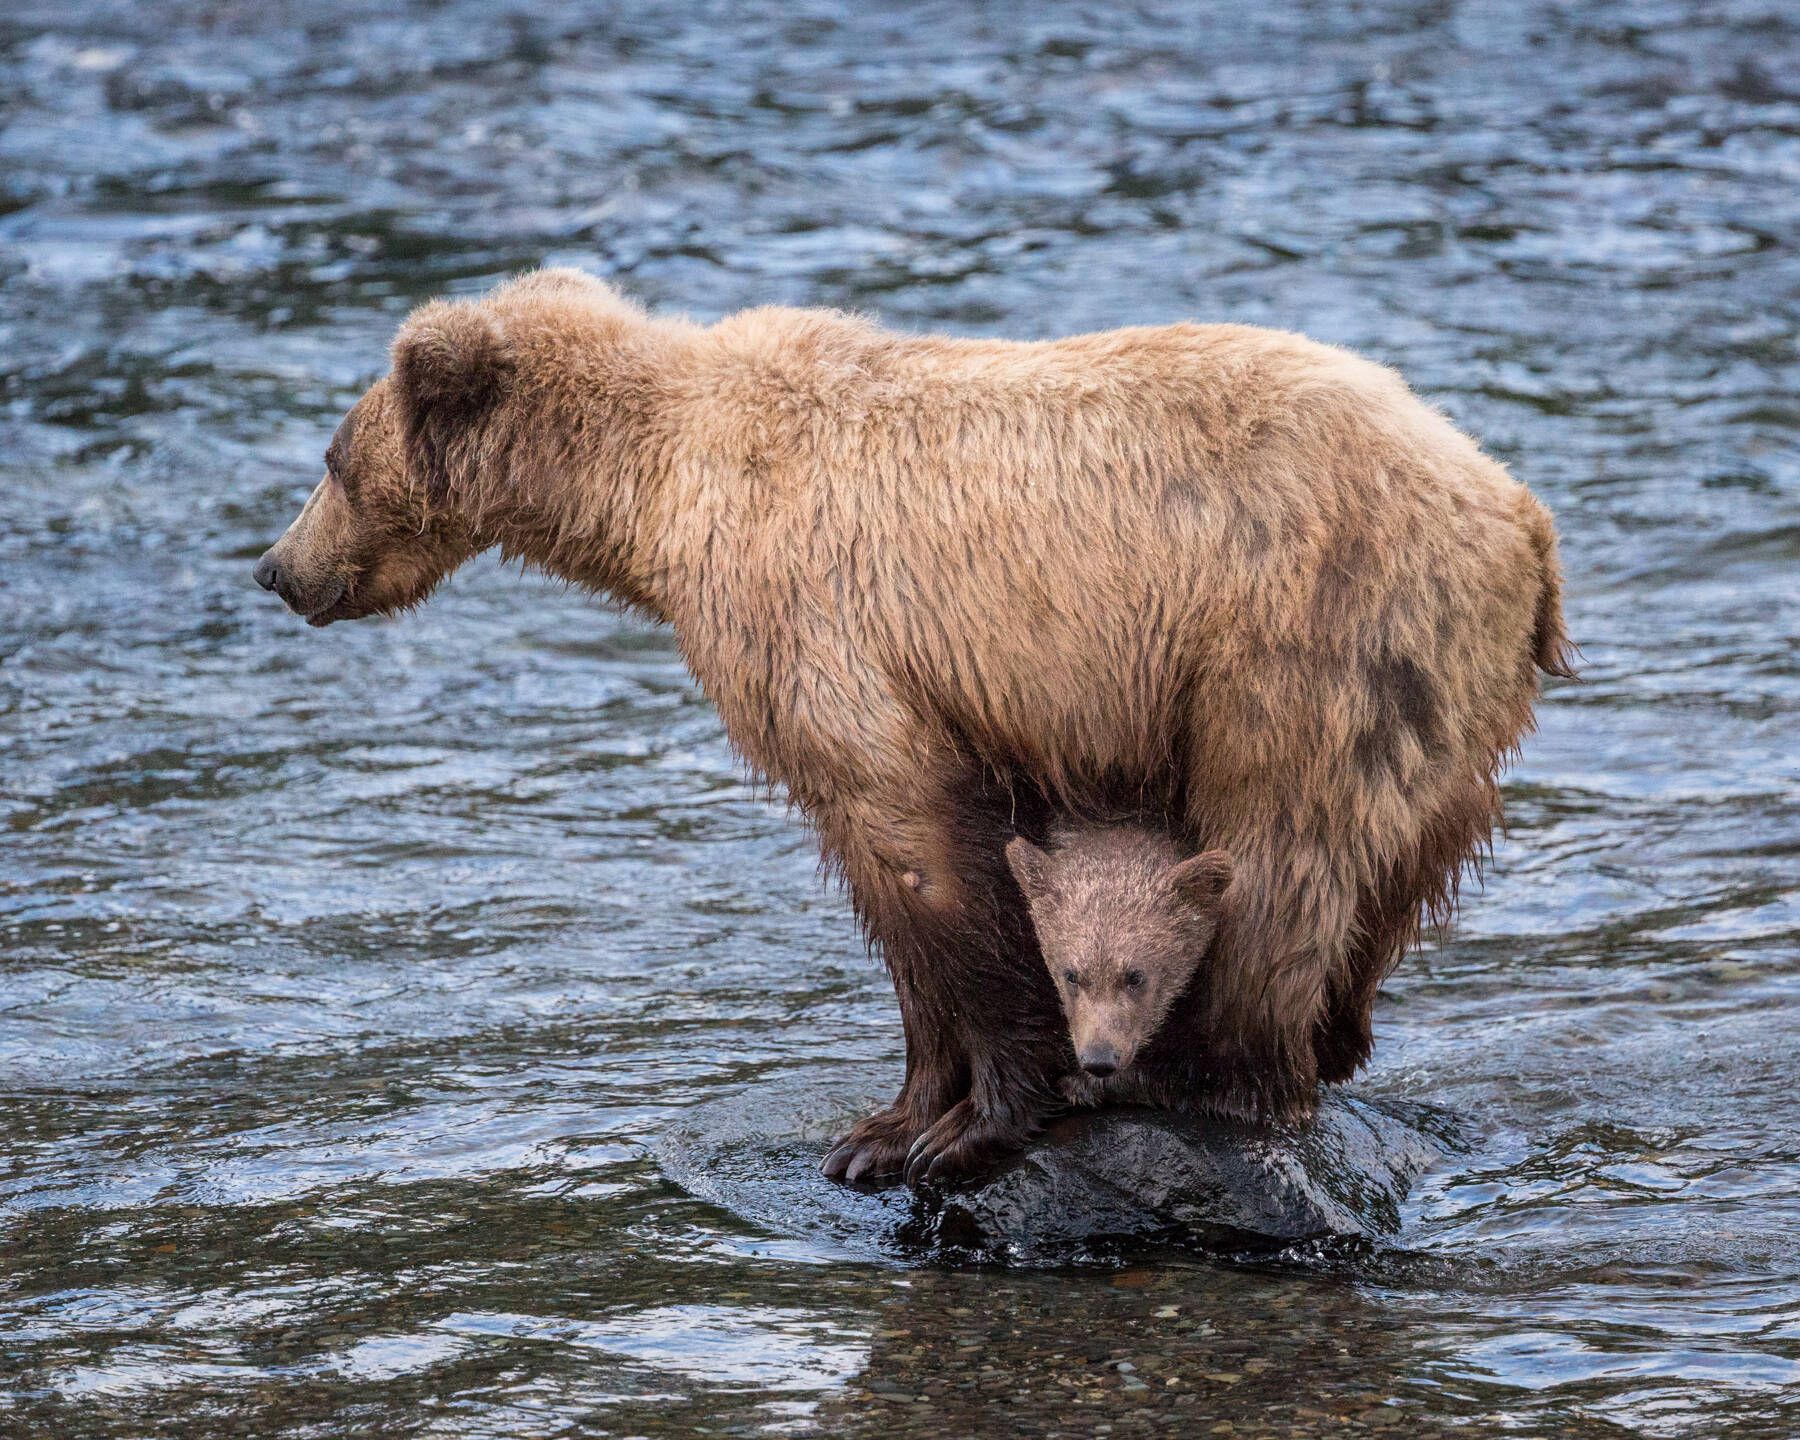 “Peak A Boo,” a photograph by Anchorage photographer Tim Davis taken in the summer of 2022 at Katmai National Park, is part of Davis’s exhibit at Fireweed Gallery on display through July in Homer, Alaska. Photo courtesy of Fireweed Gallery